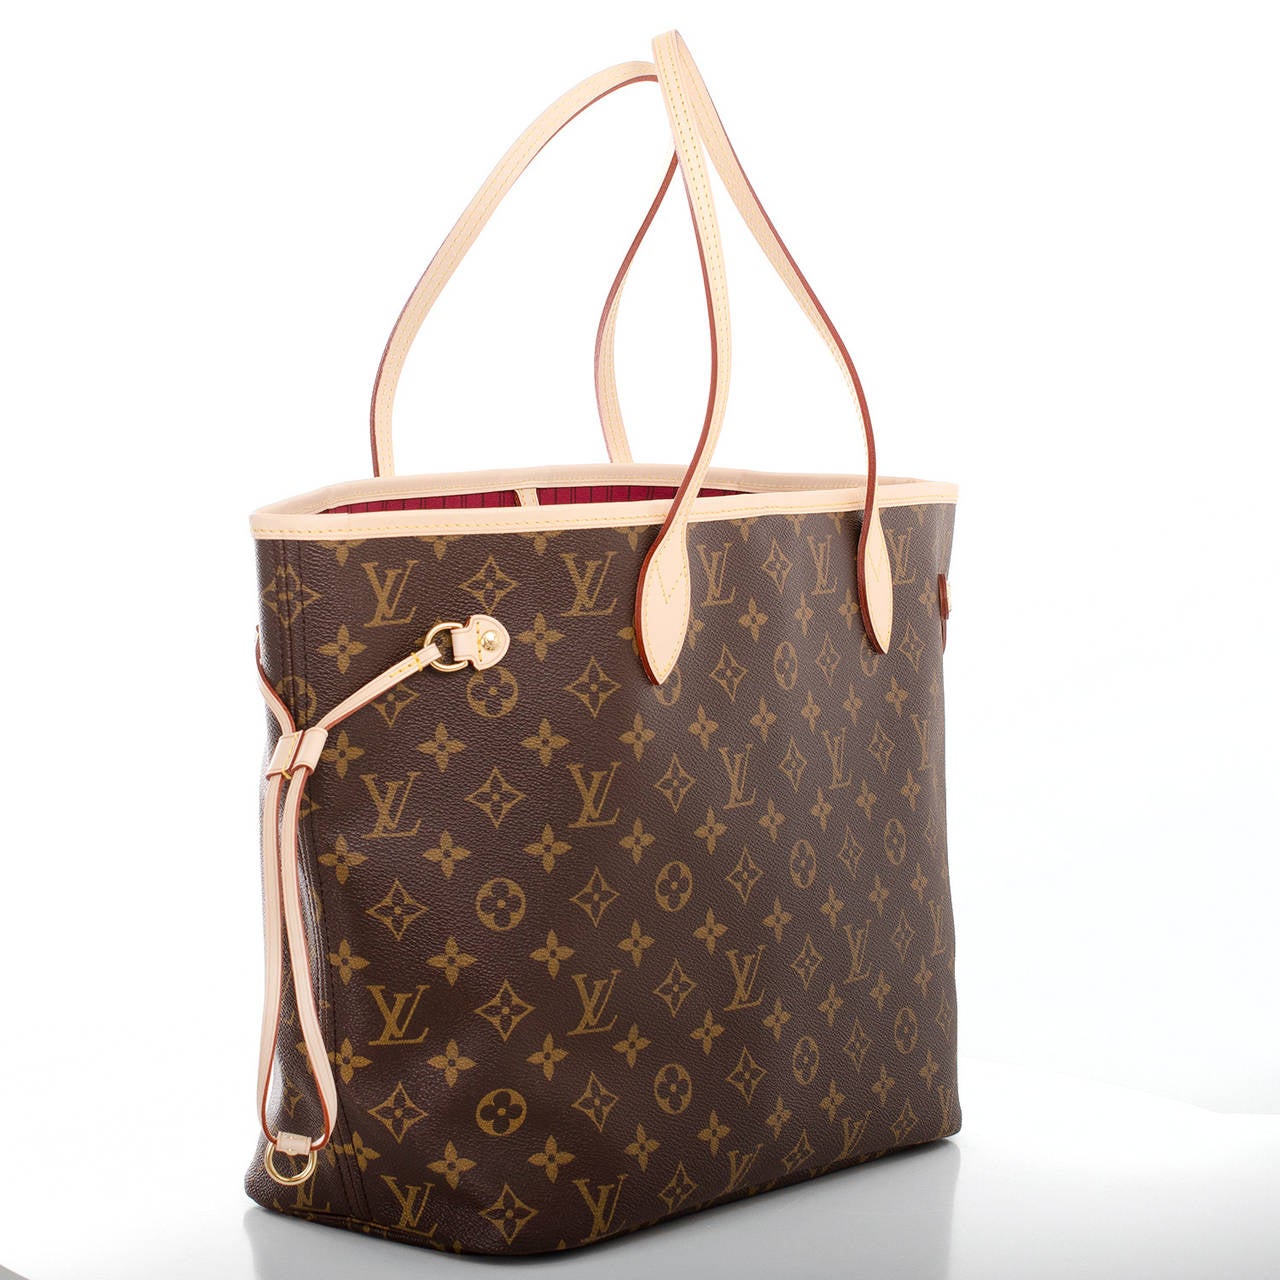 Louis Vuitton Monogram Fuchsia Neo Neverfull MM of coated canvas with vachetta leather trim.

This classic tote features polished brass hardware, detachable zipper pouch, adjustable drawstring sides, hidden top hook closure and double flat